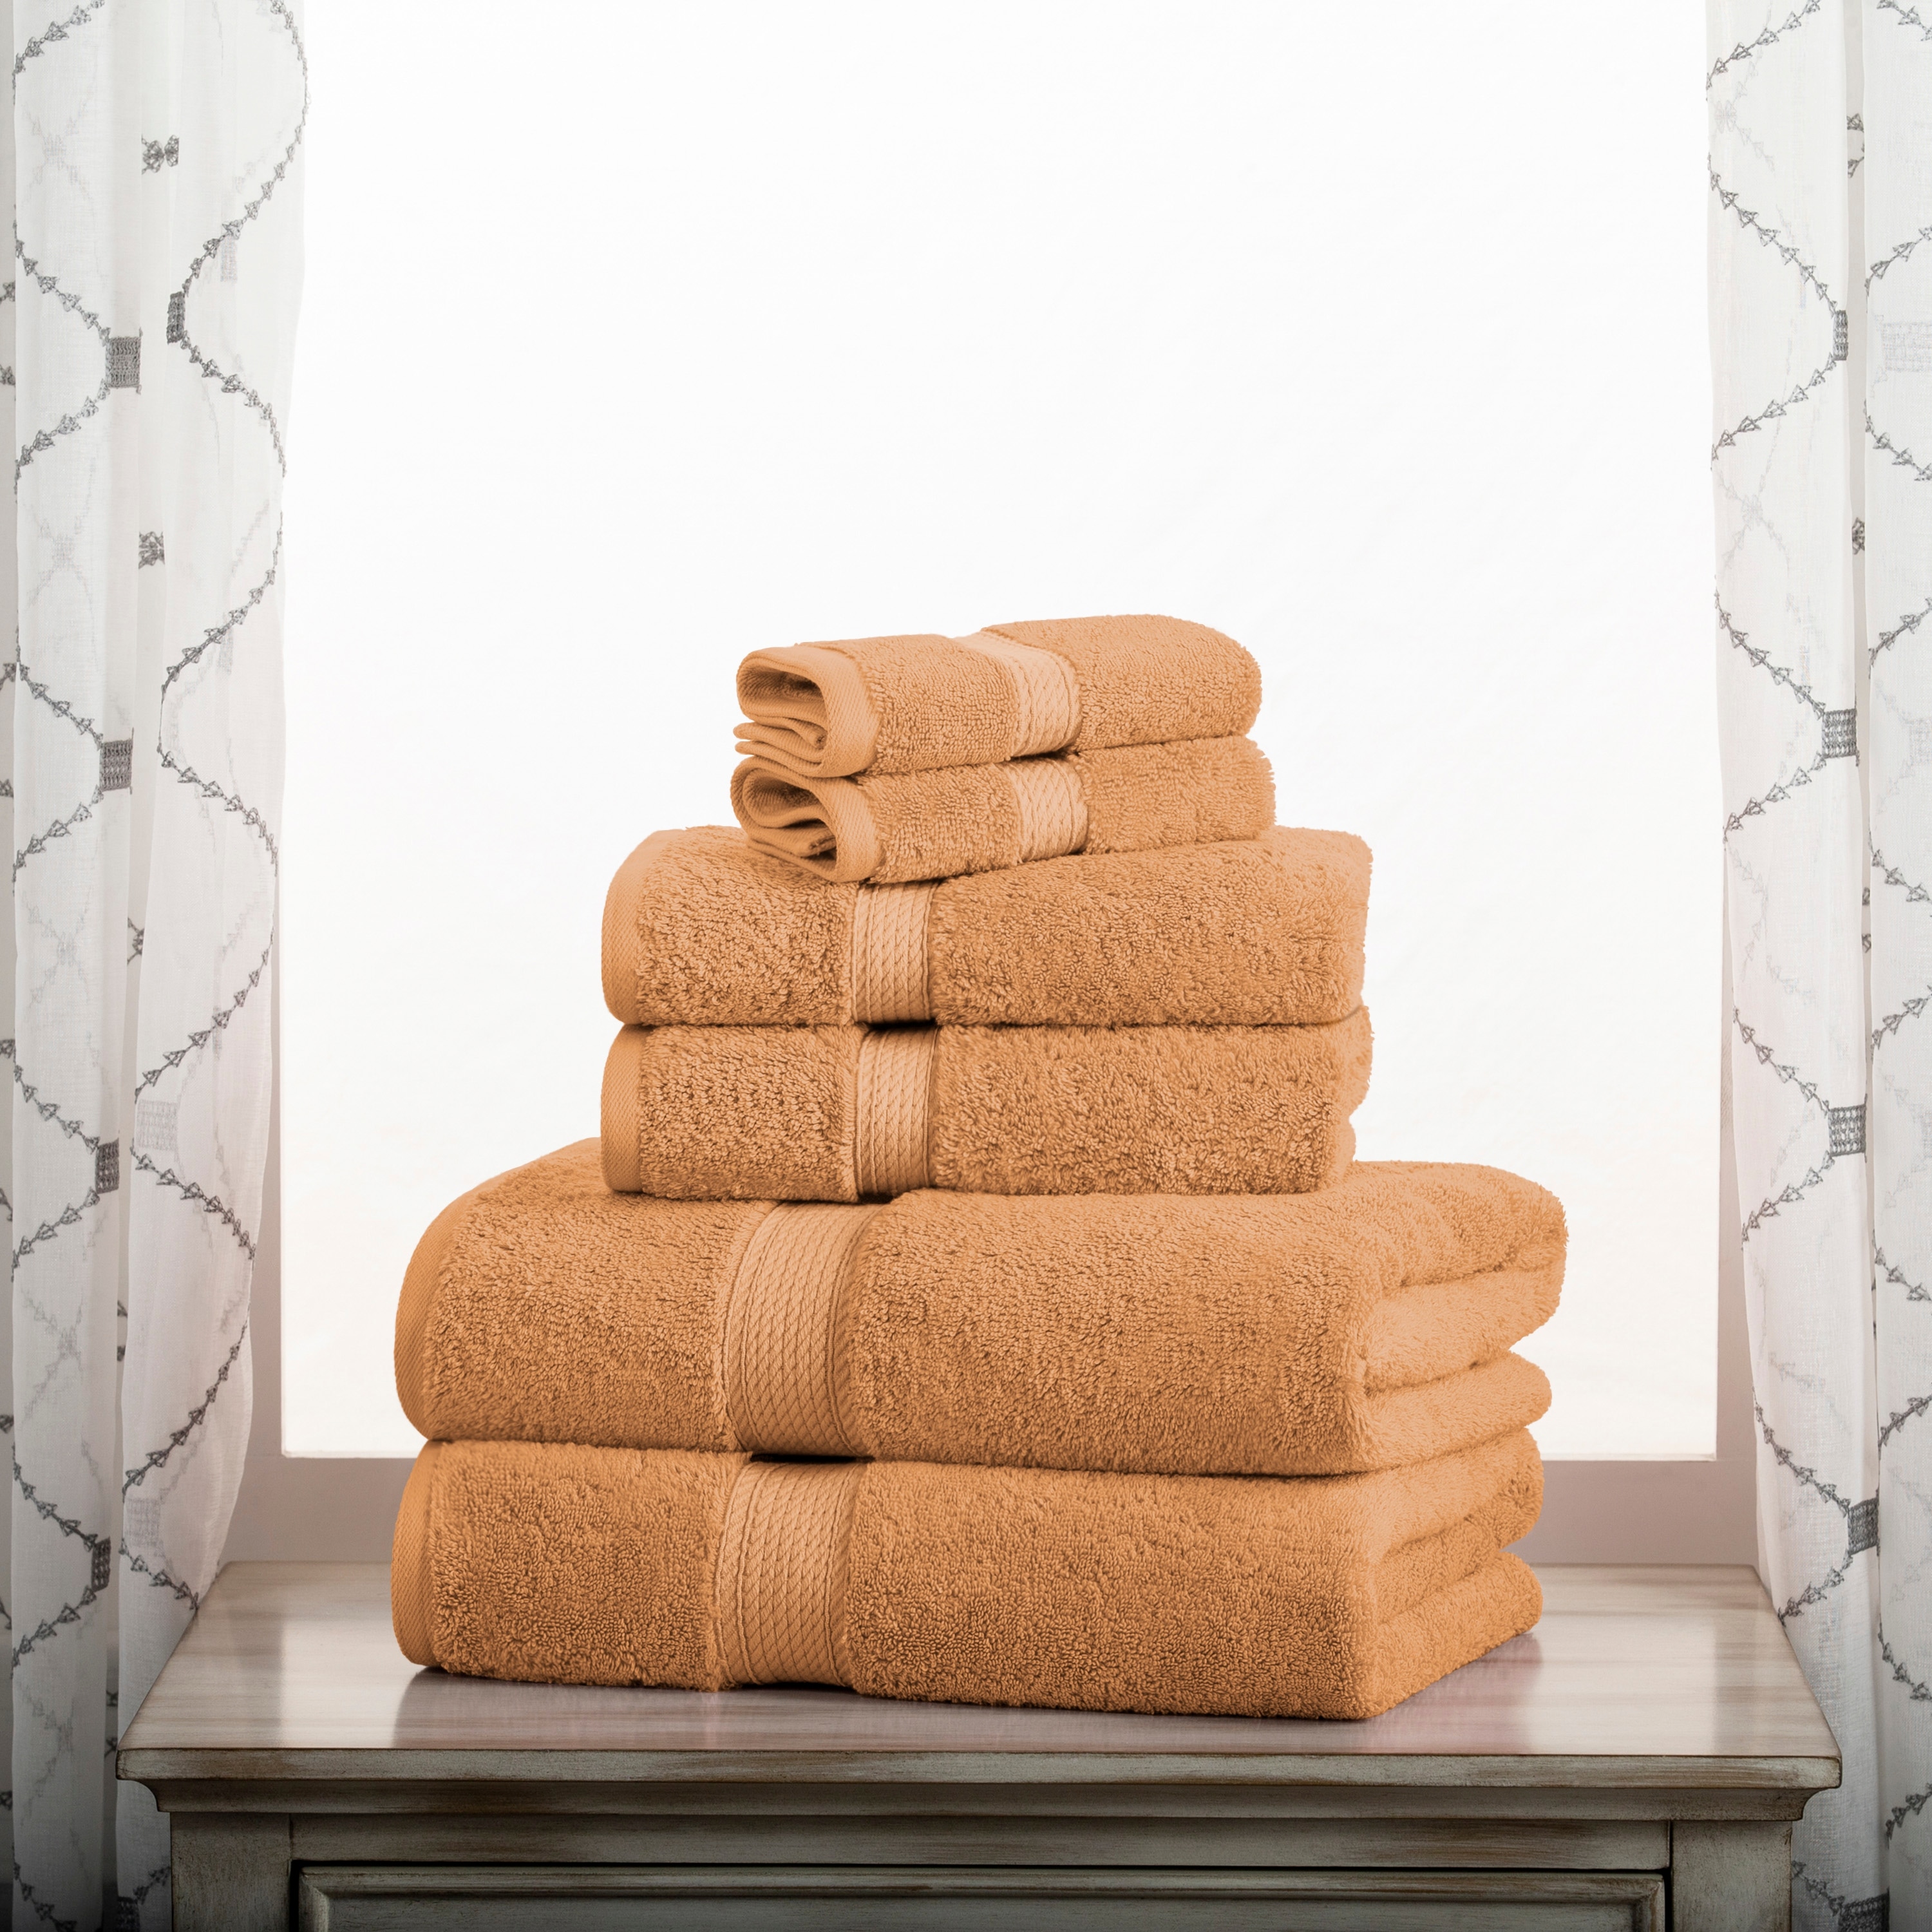 https://ak1.ostkcdn.com/images/products/is/images/direct/77713e79e035d8511998bc3648fca122052f4edb/Egyptian-Cotton-Heavyweight-Solid-Plush-Towel-Set-by-Superior.jpg